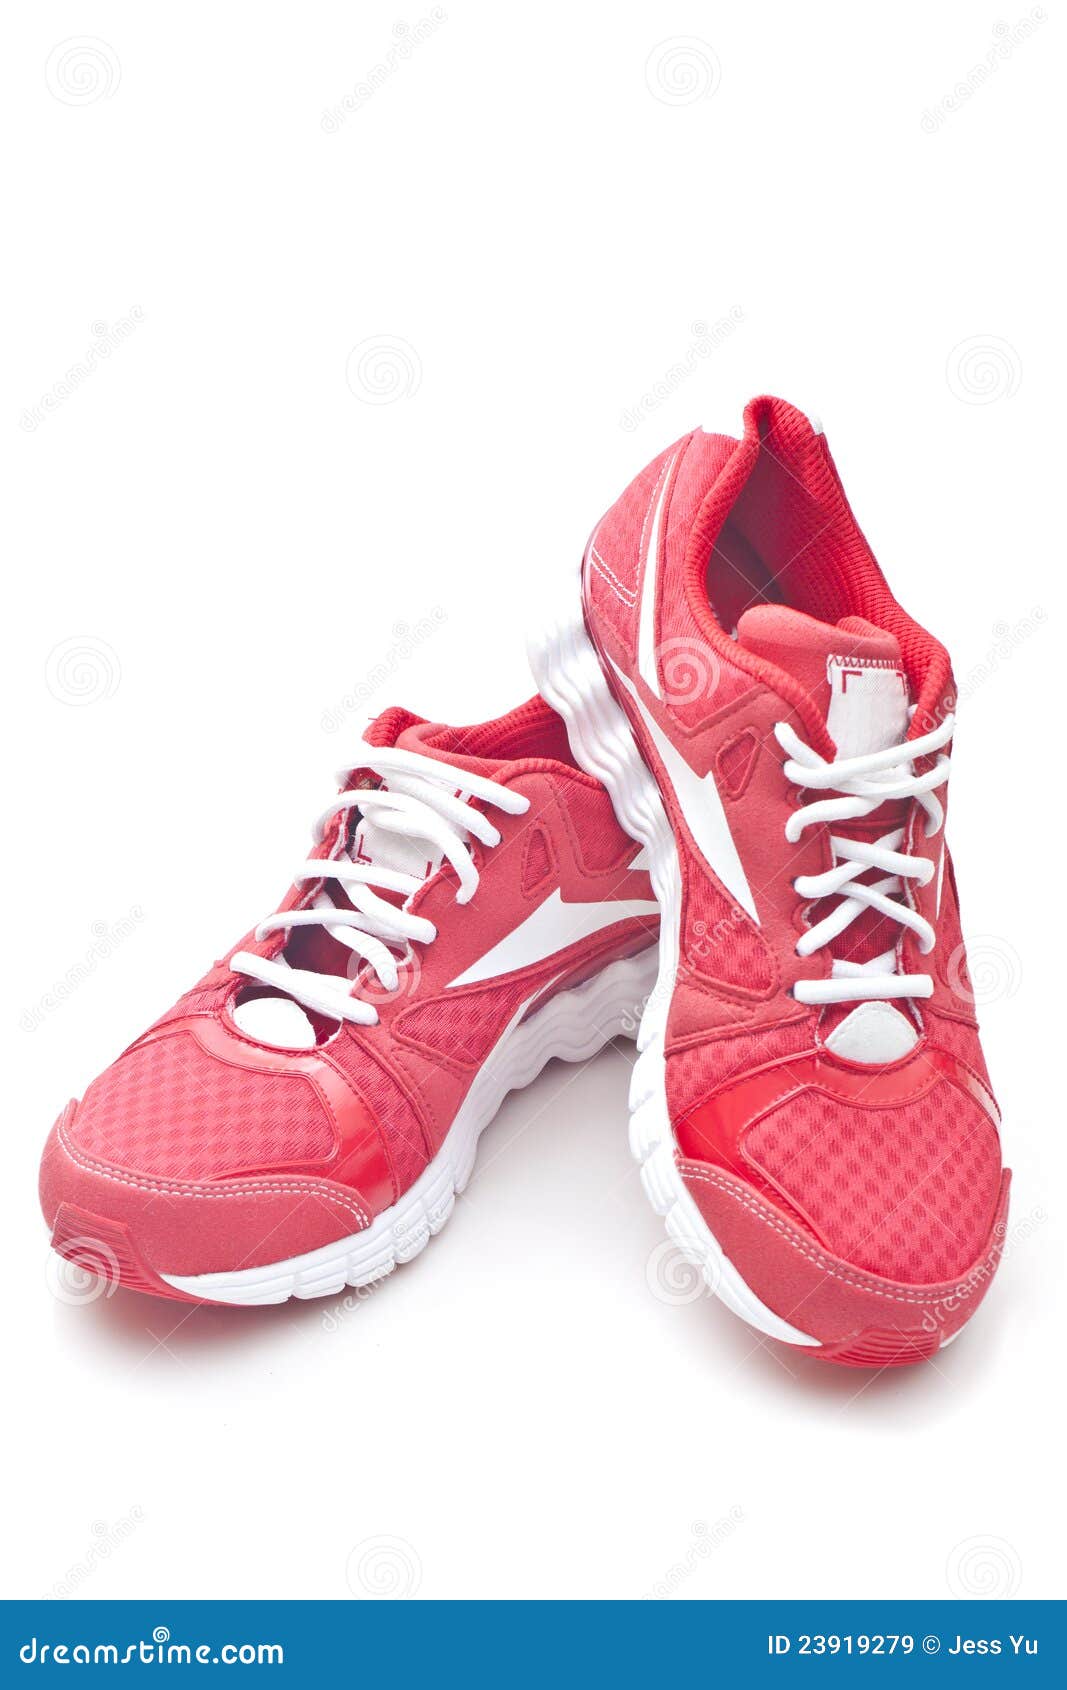 Red running sports shoes stock image. Image of jogging - 23919279